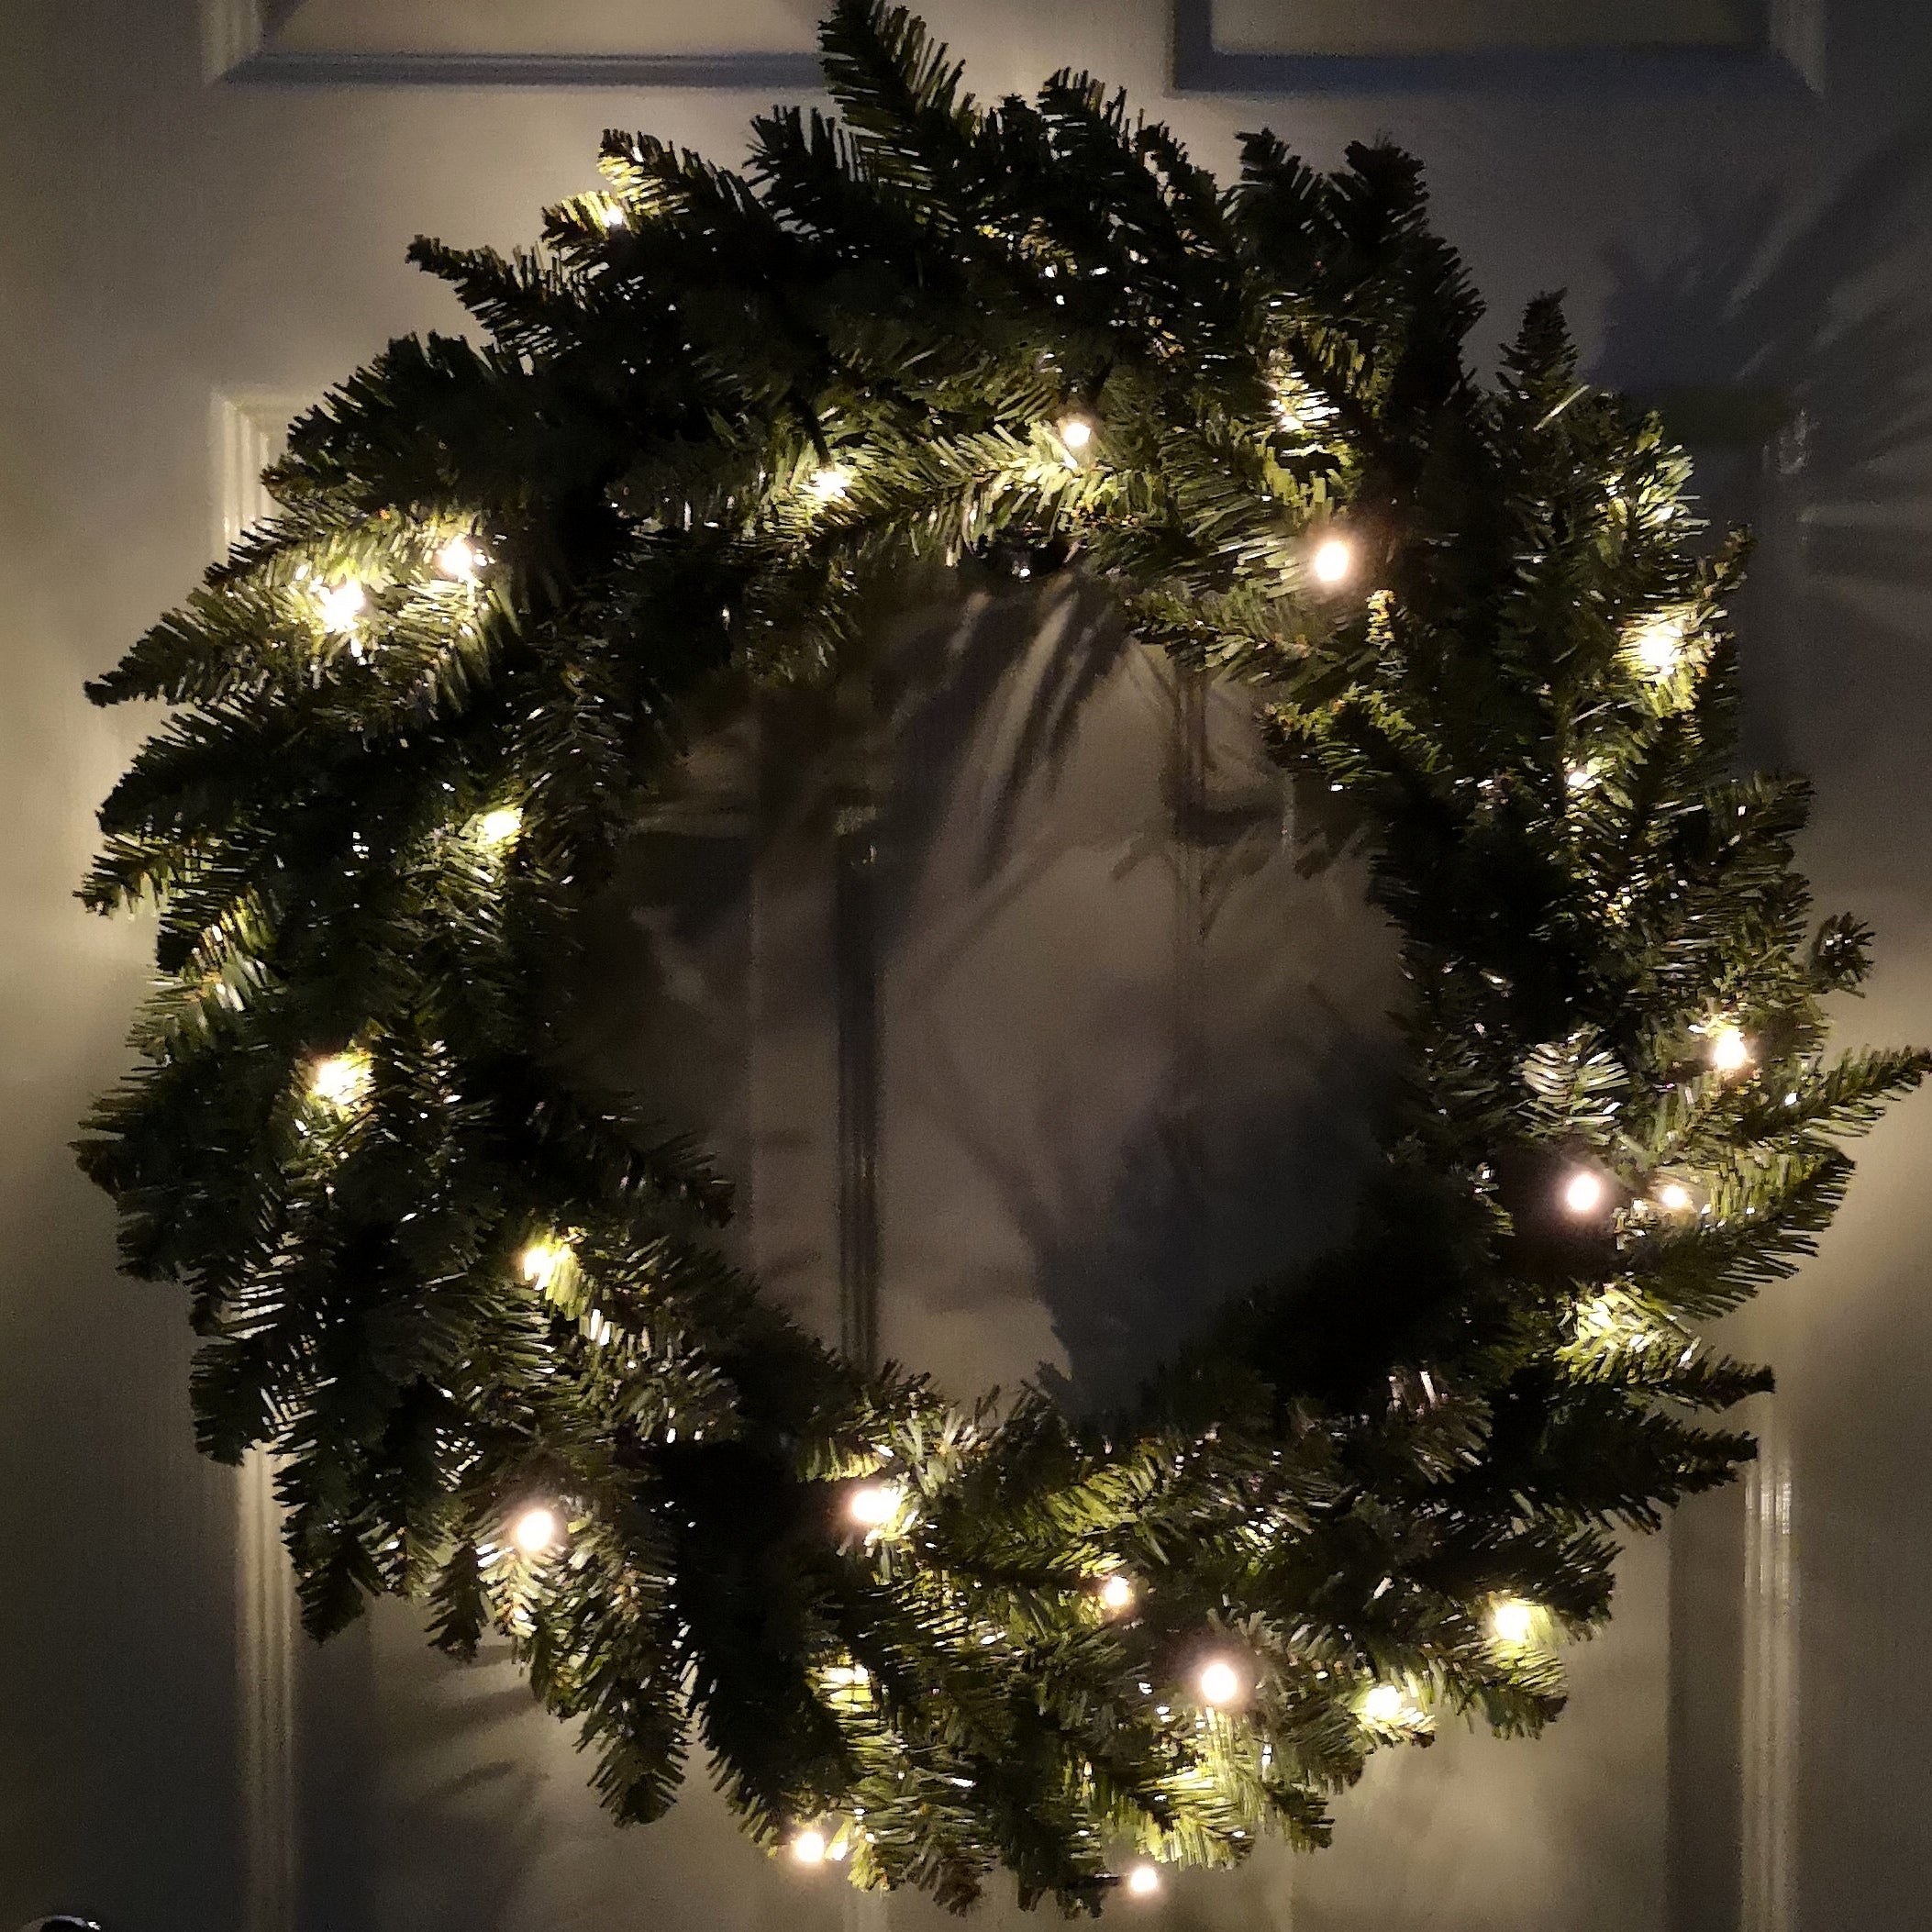 60cm Plain Green Christmas Wreath with 50 Warm White LEDs and 160 Bullet Tips